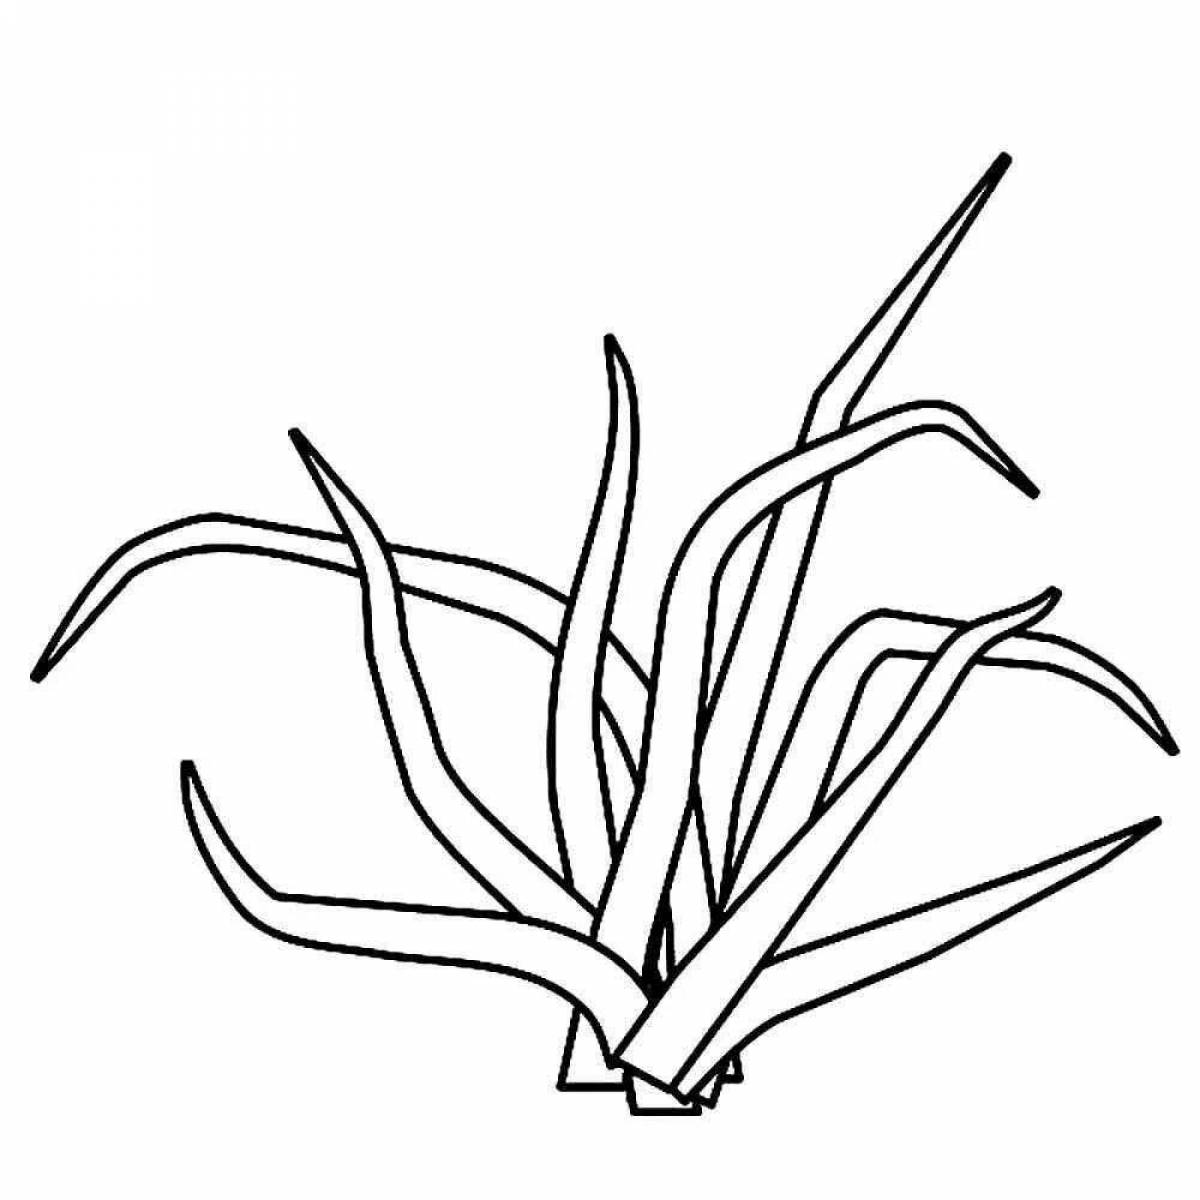 Coloring pages abundant grass for children